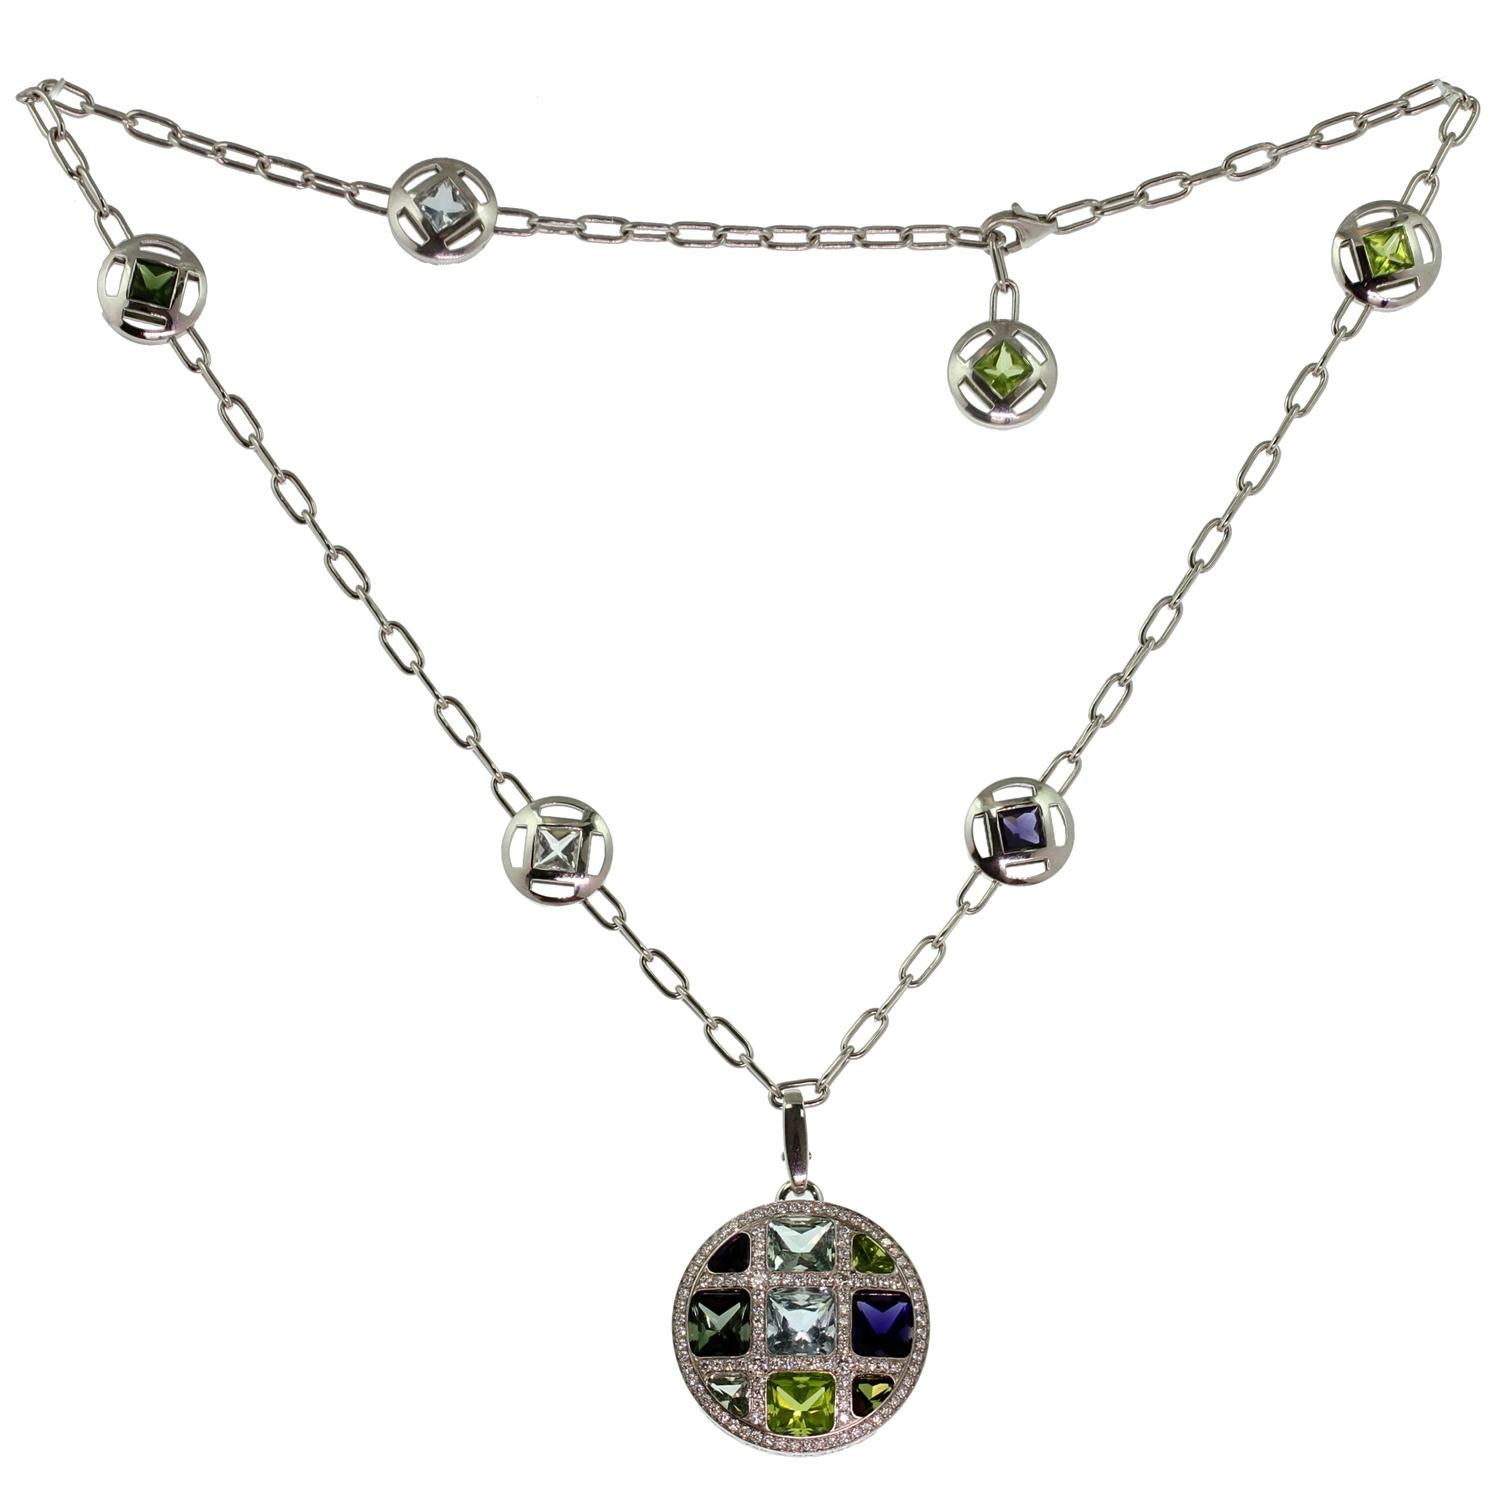 This rare Cartier necklace and enhancer pendant from the fabulous Pasha collection is crafted in 18k white gold and set with round brilliant-cut diamonds and a vibrant array of gemstones: aquamarine, iolite, peridot, and tourmaline. Made in France